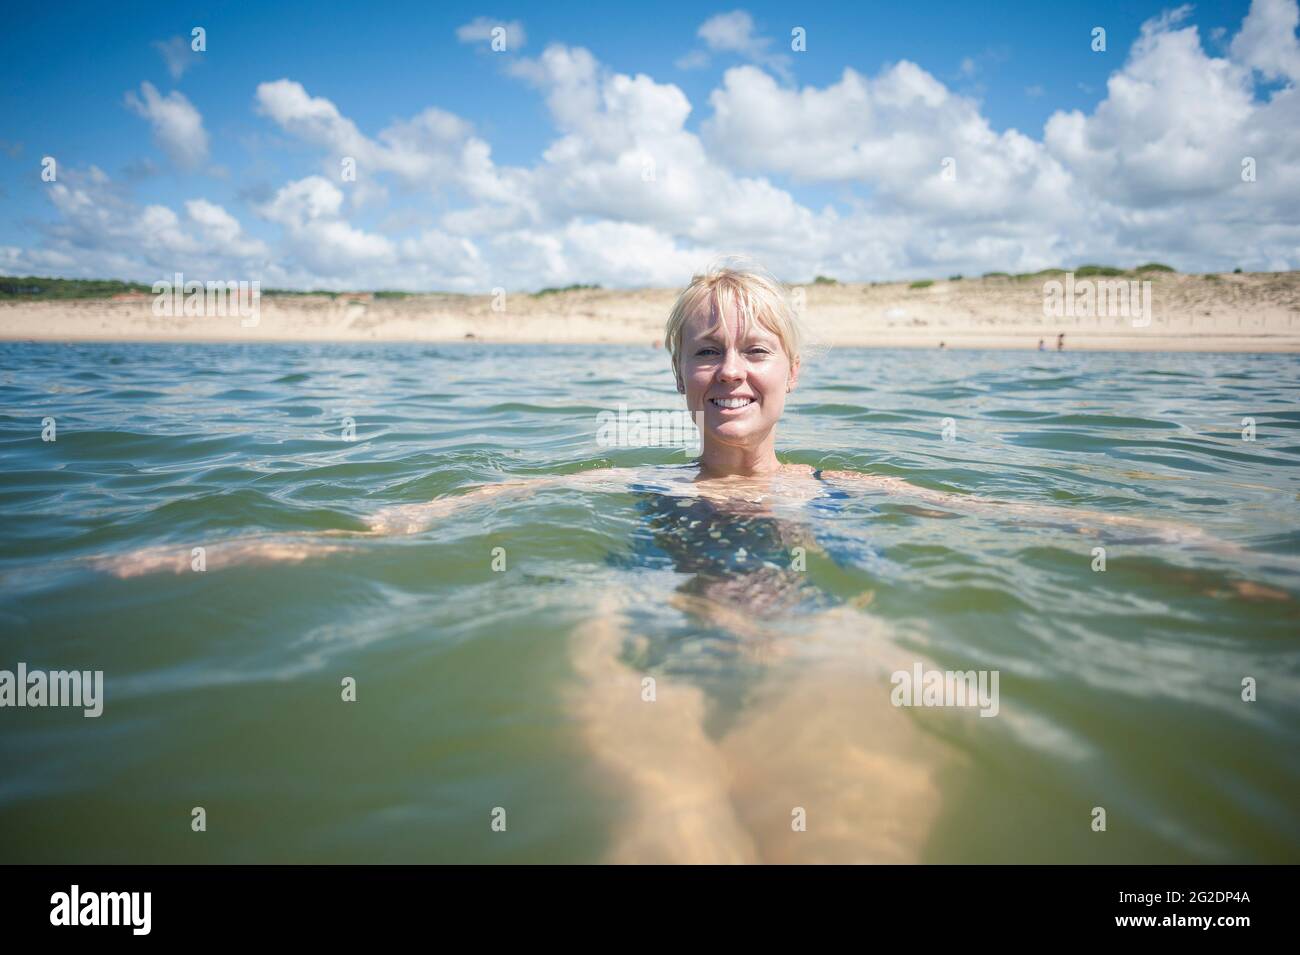 A person swimming in the water on holiday in France. Stock Photo